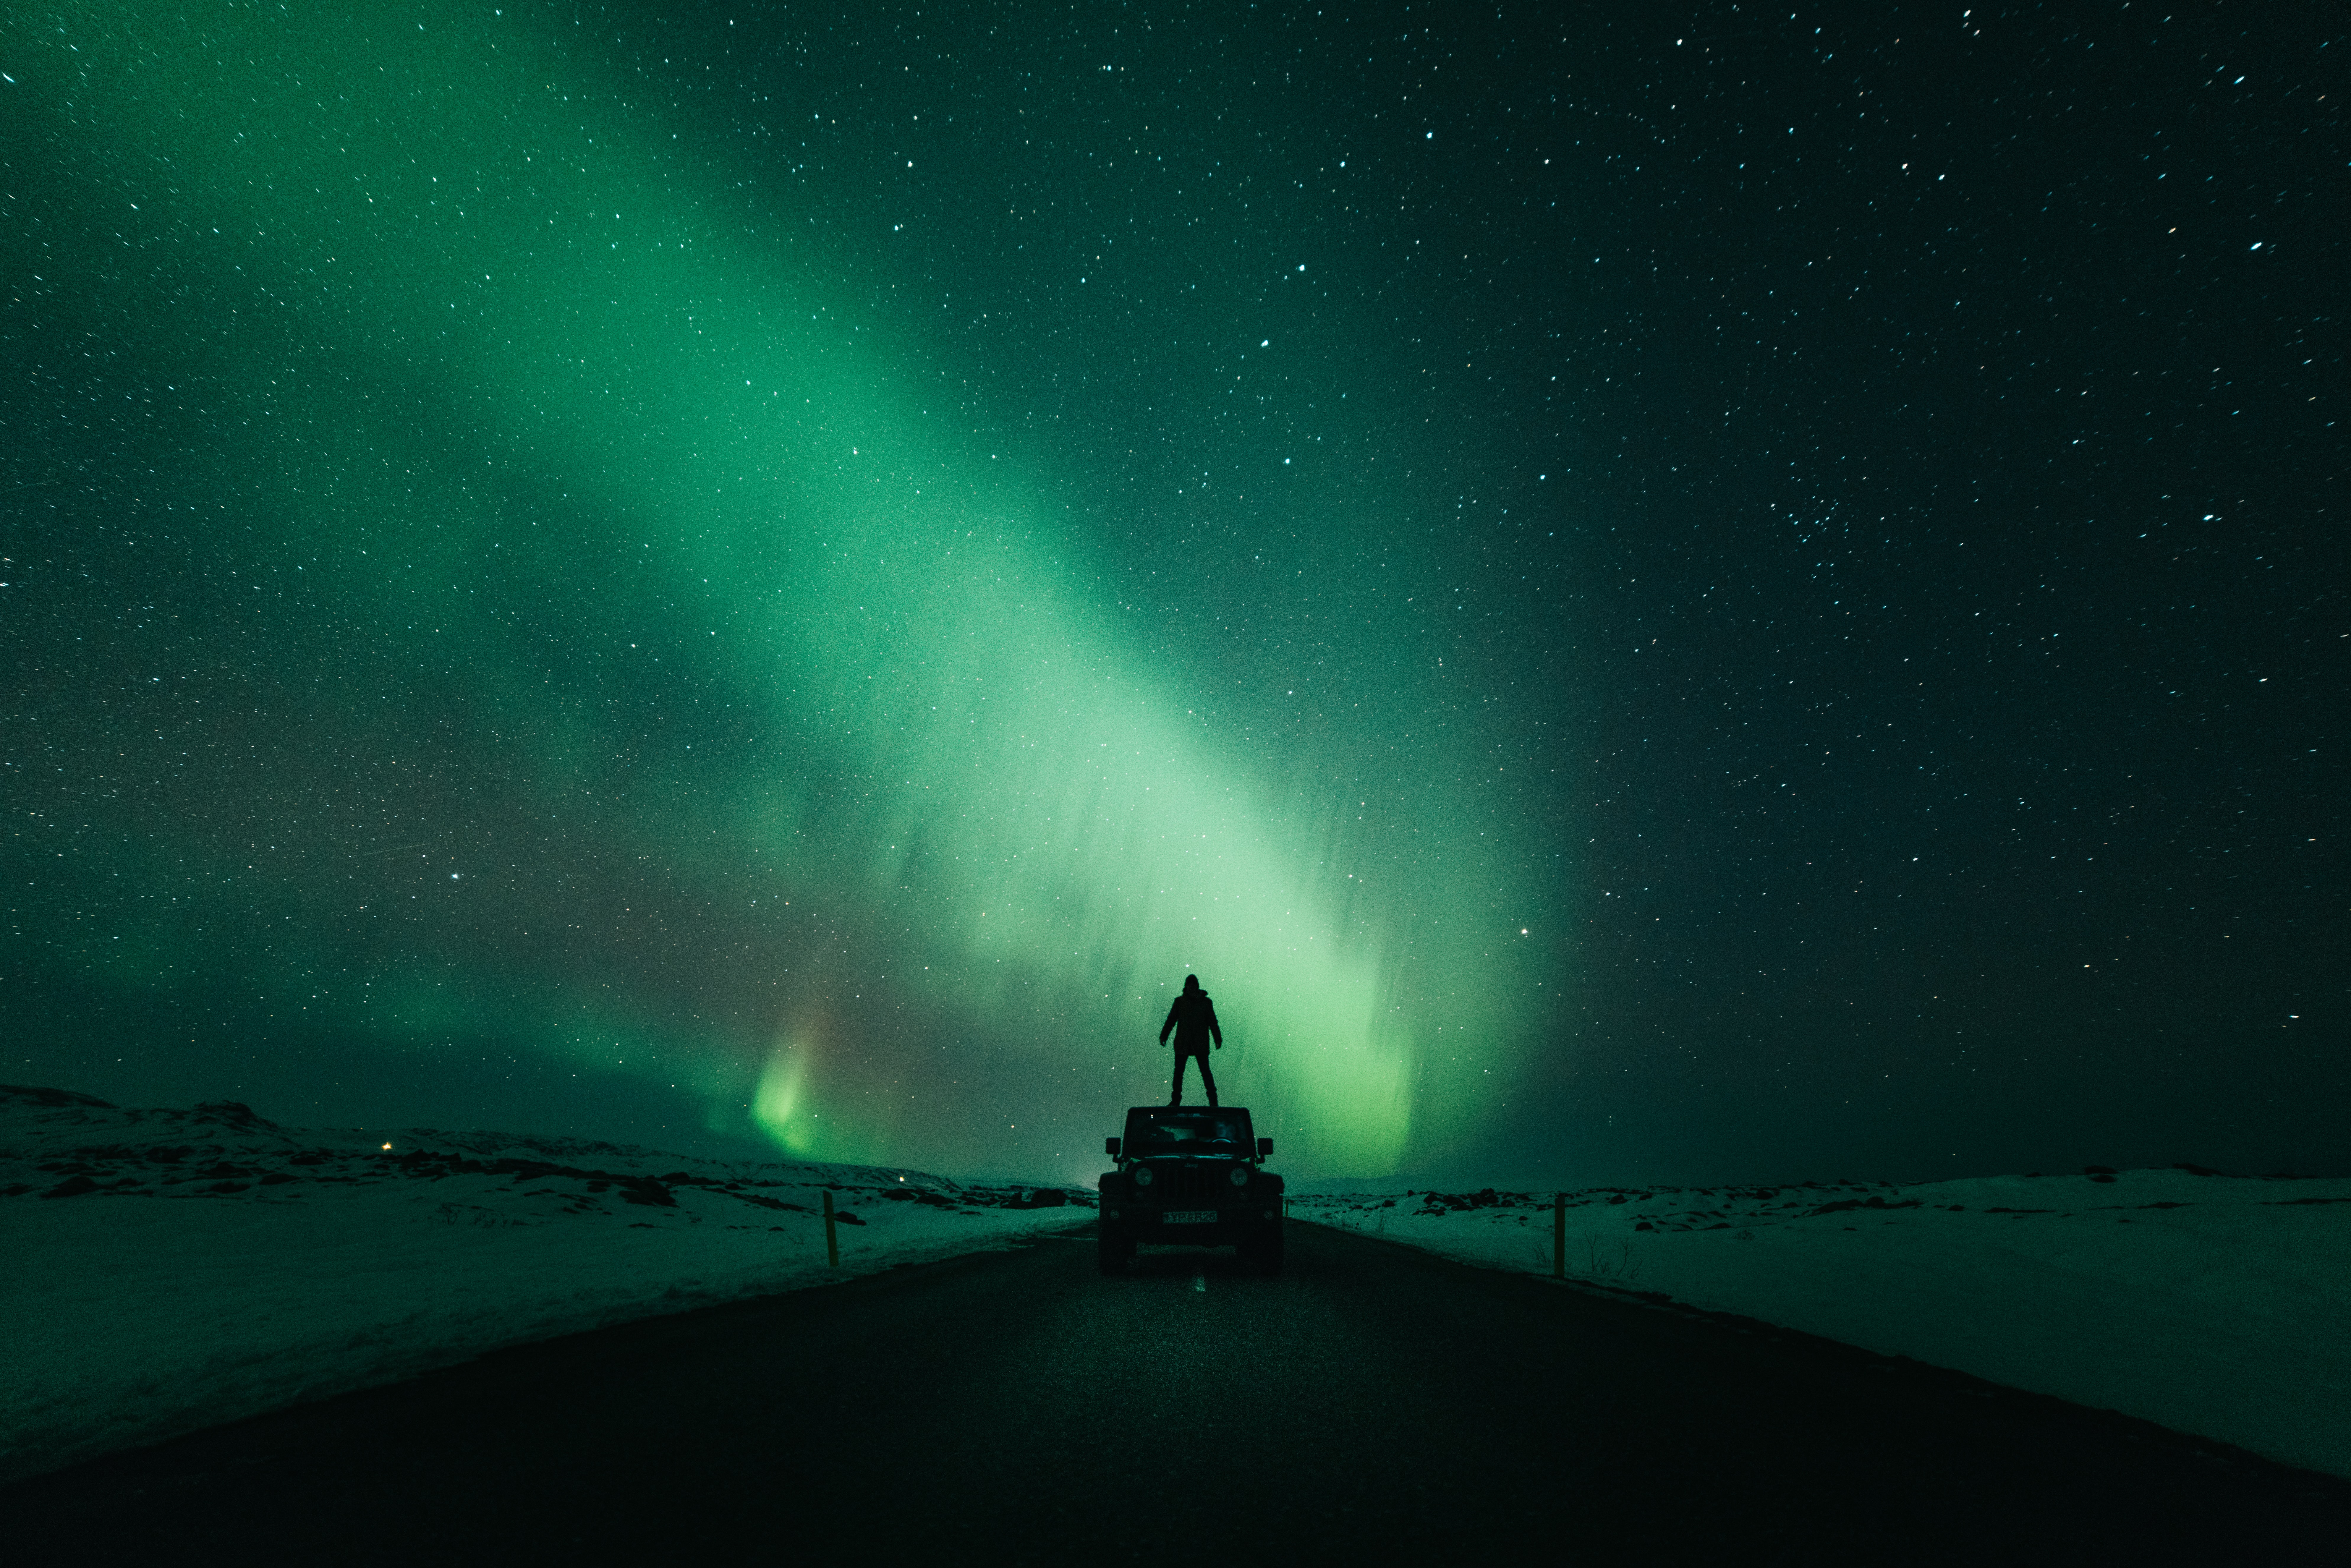 A man looks at the Northern Lights in Iceland